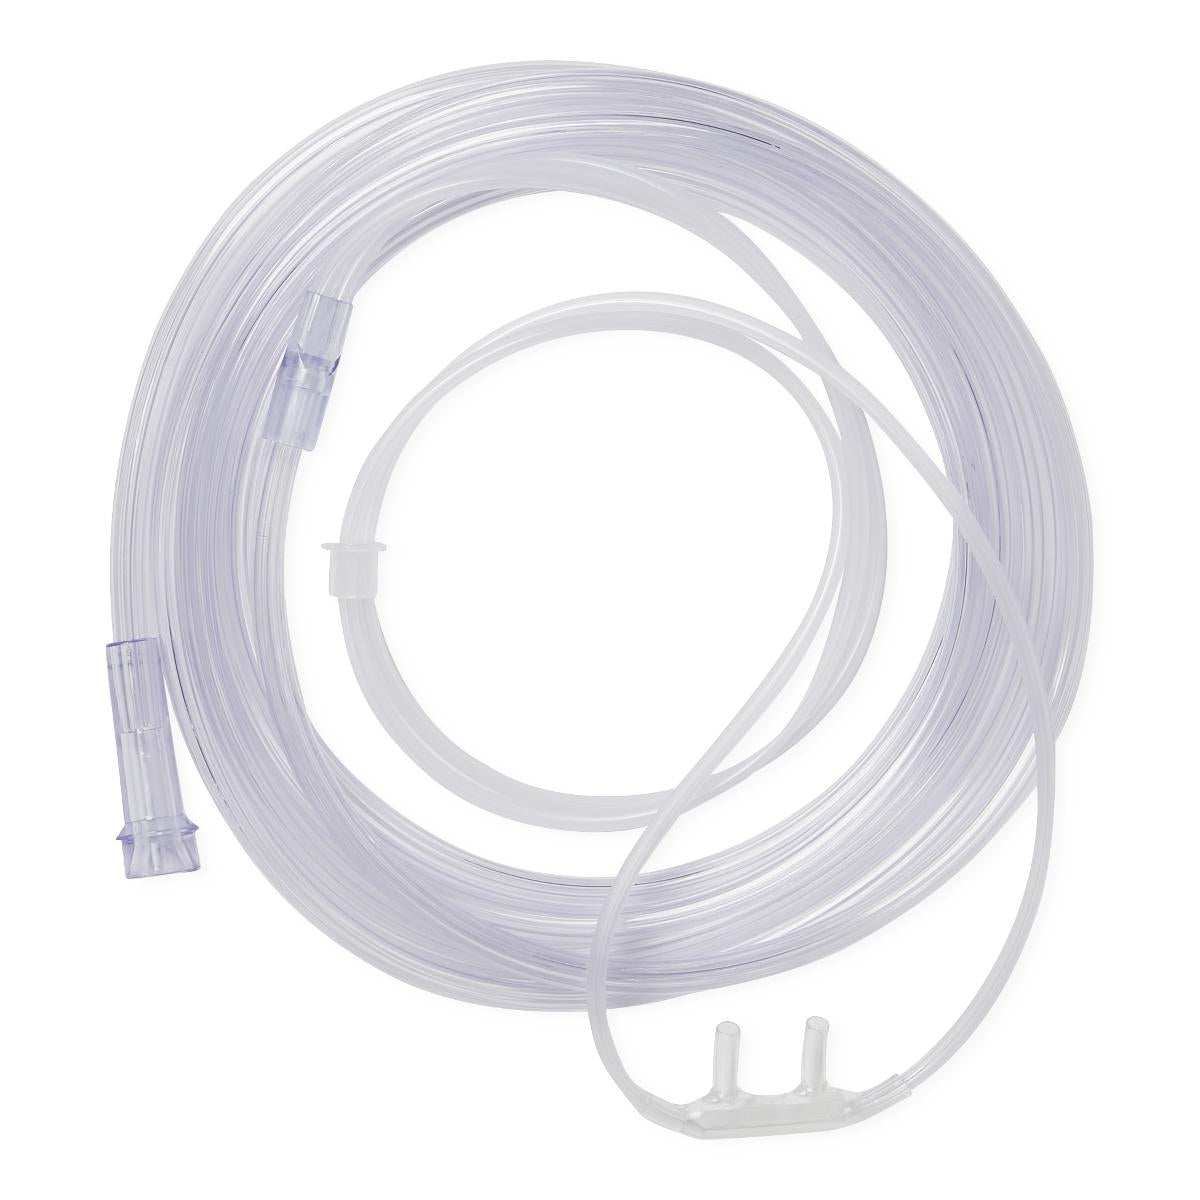 Adult Soft-Touch Nasal Cannula with 7' Tubing and Standard Connectors